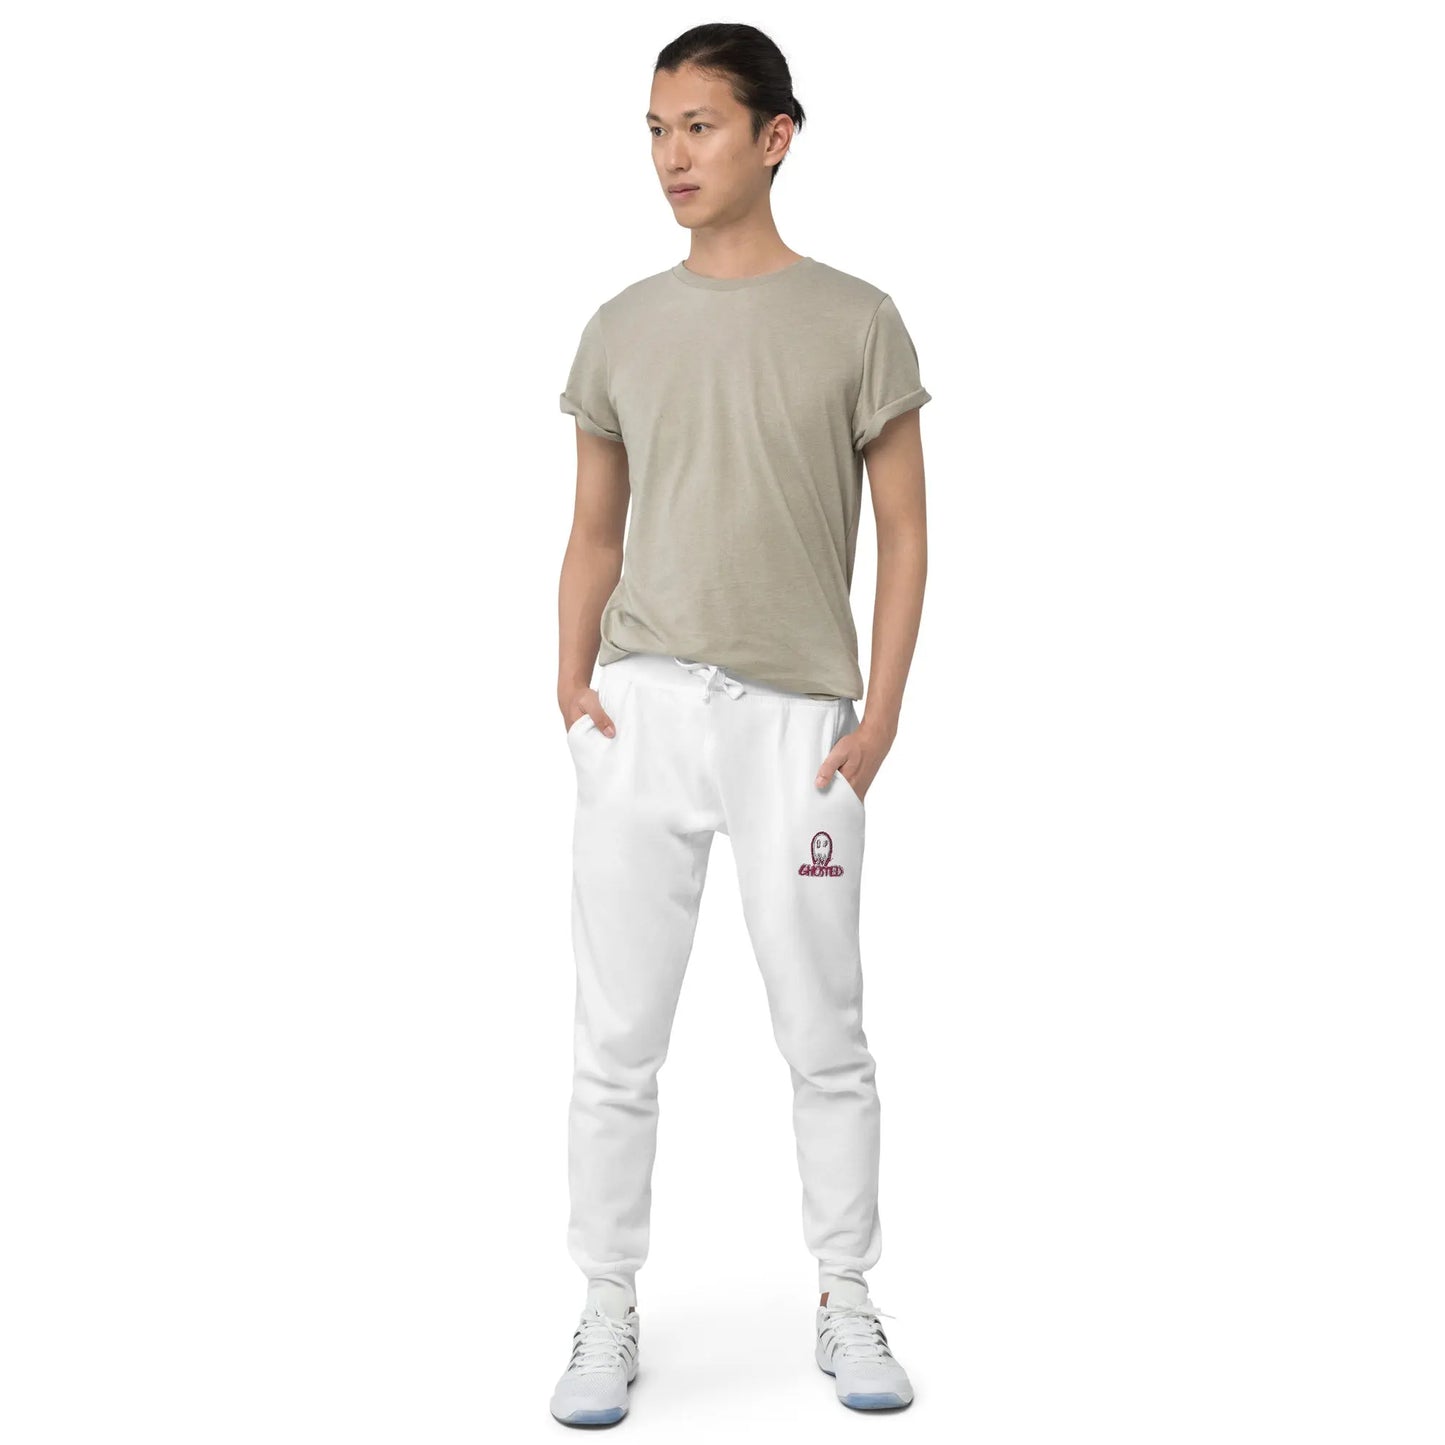 Ghosted Sweatpants - Image #11